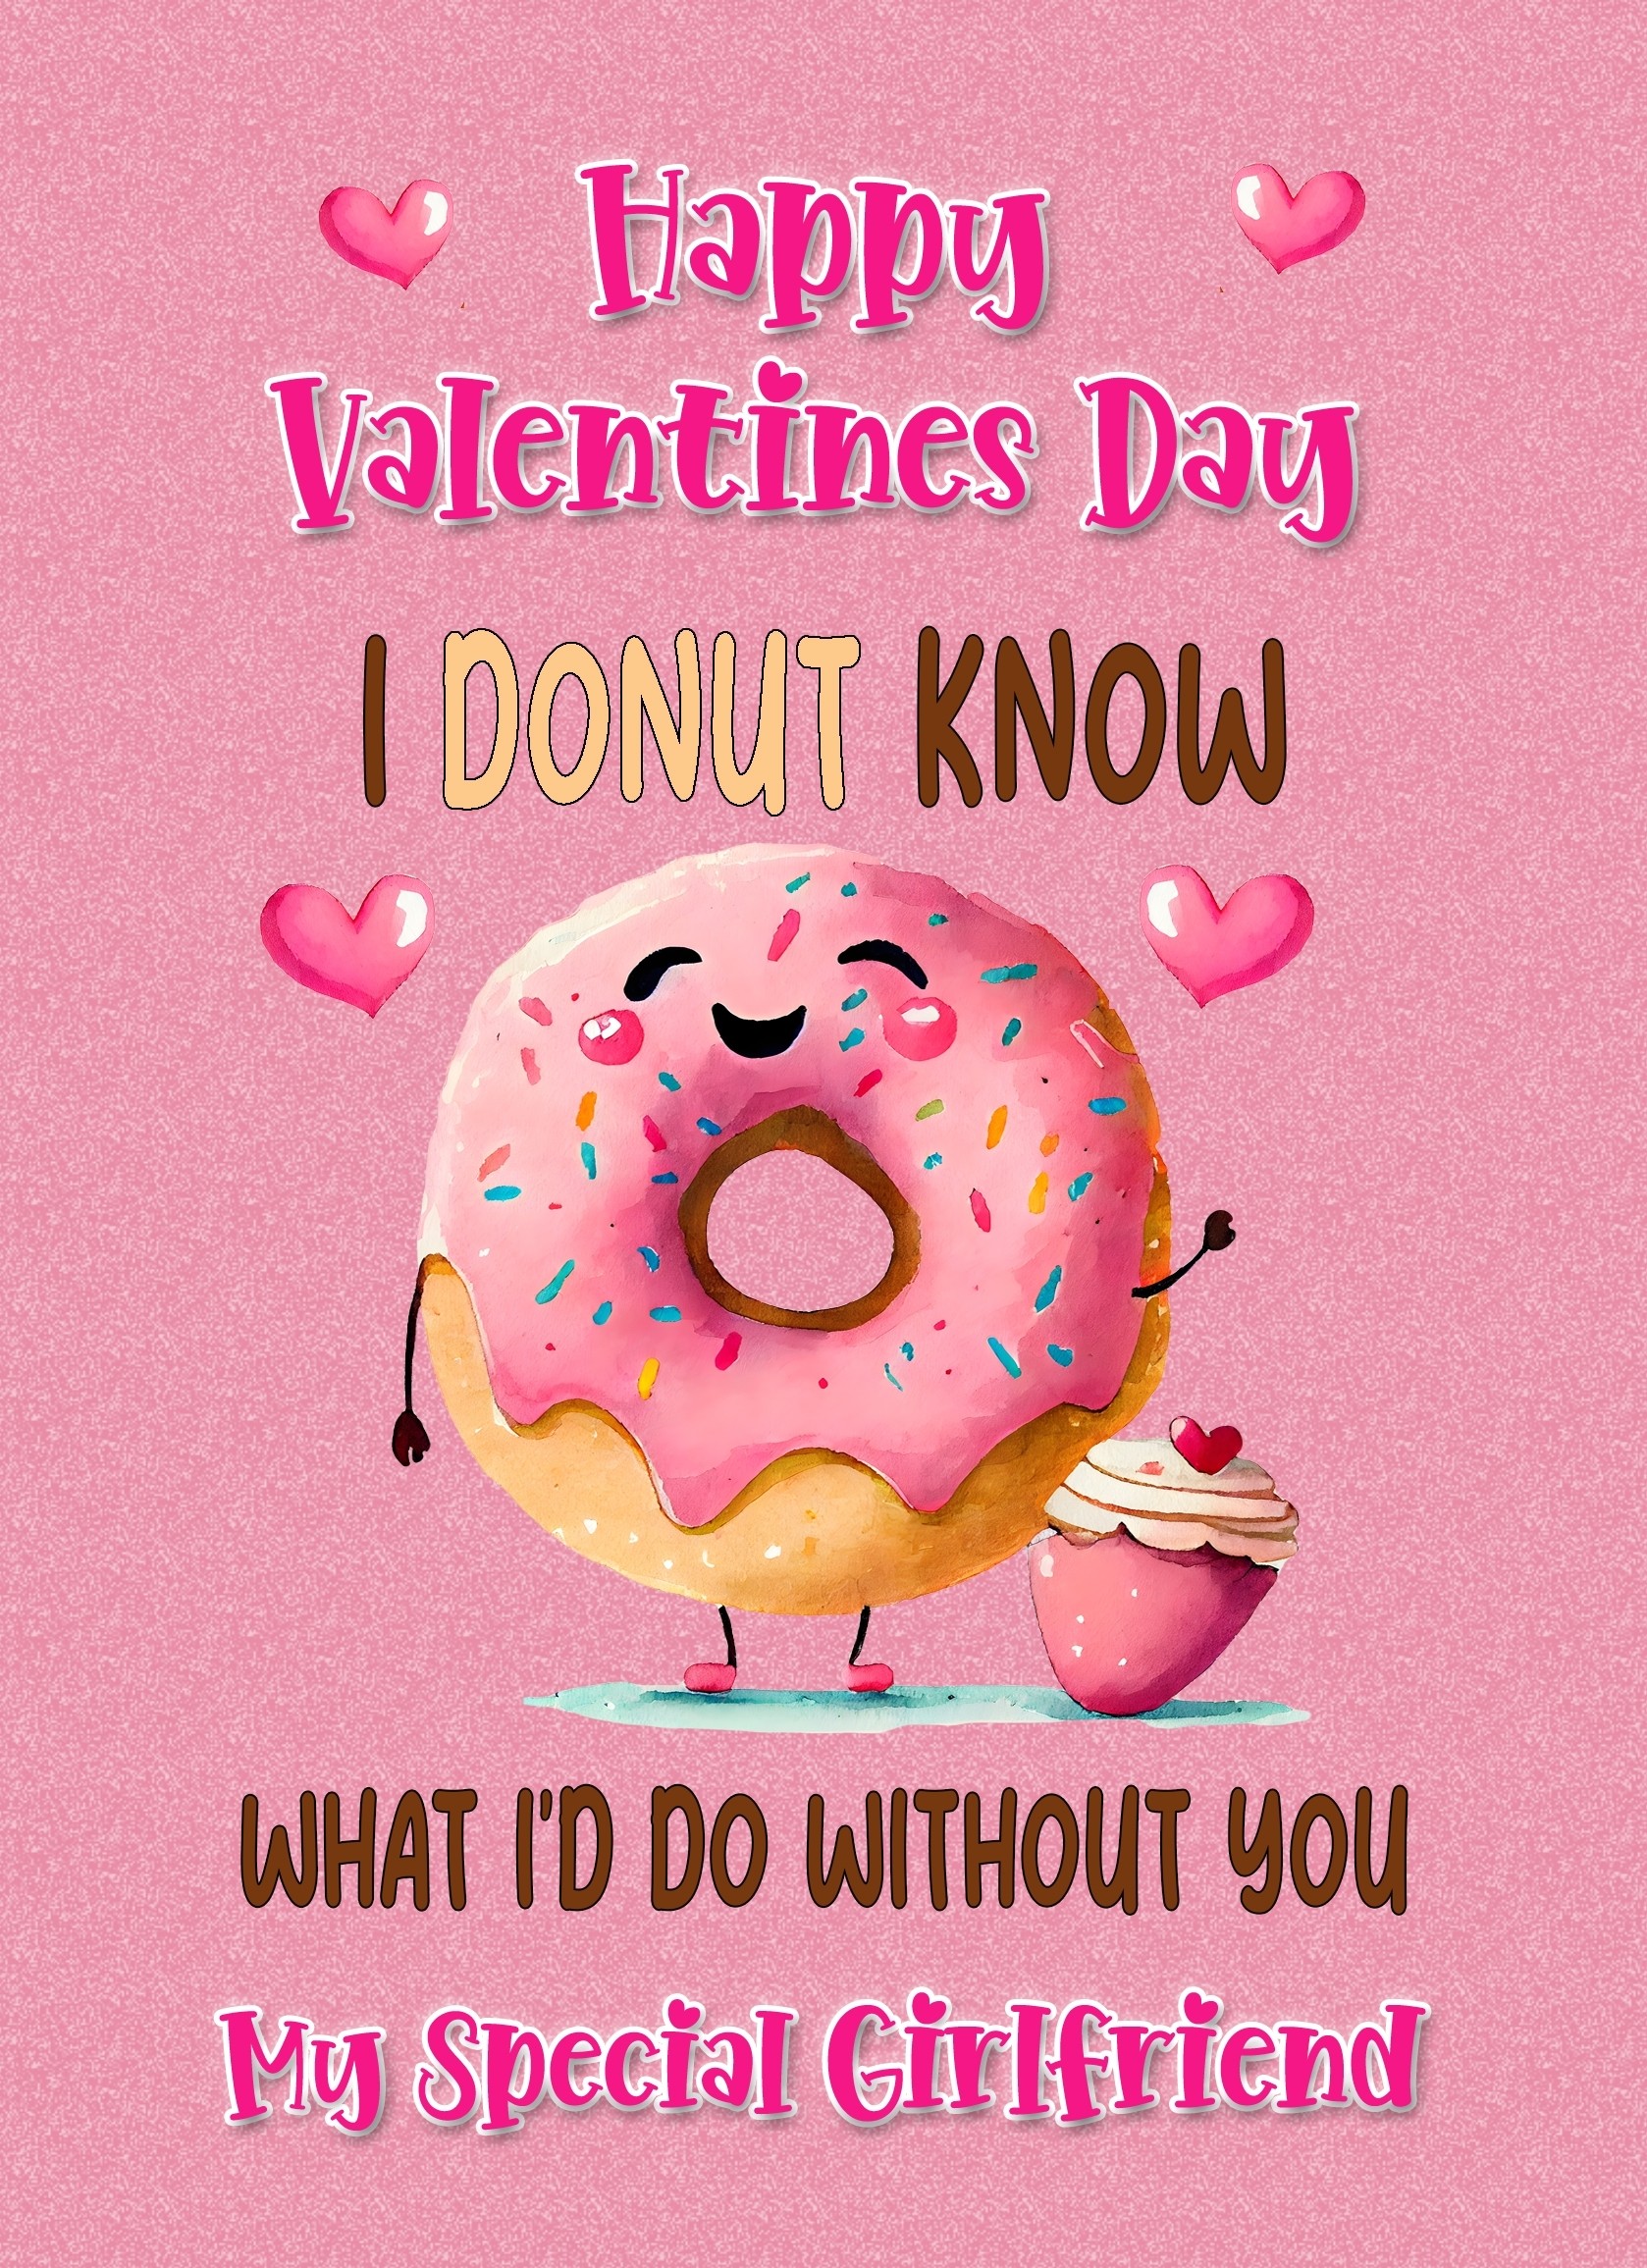 Funny Pun Valentines Day Card for Girlfriend (Donut Know)